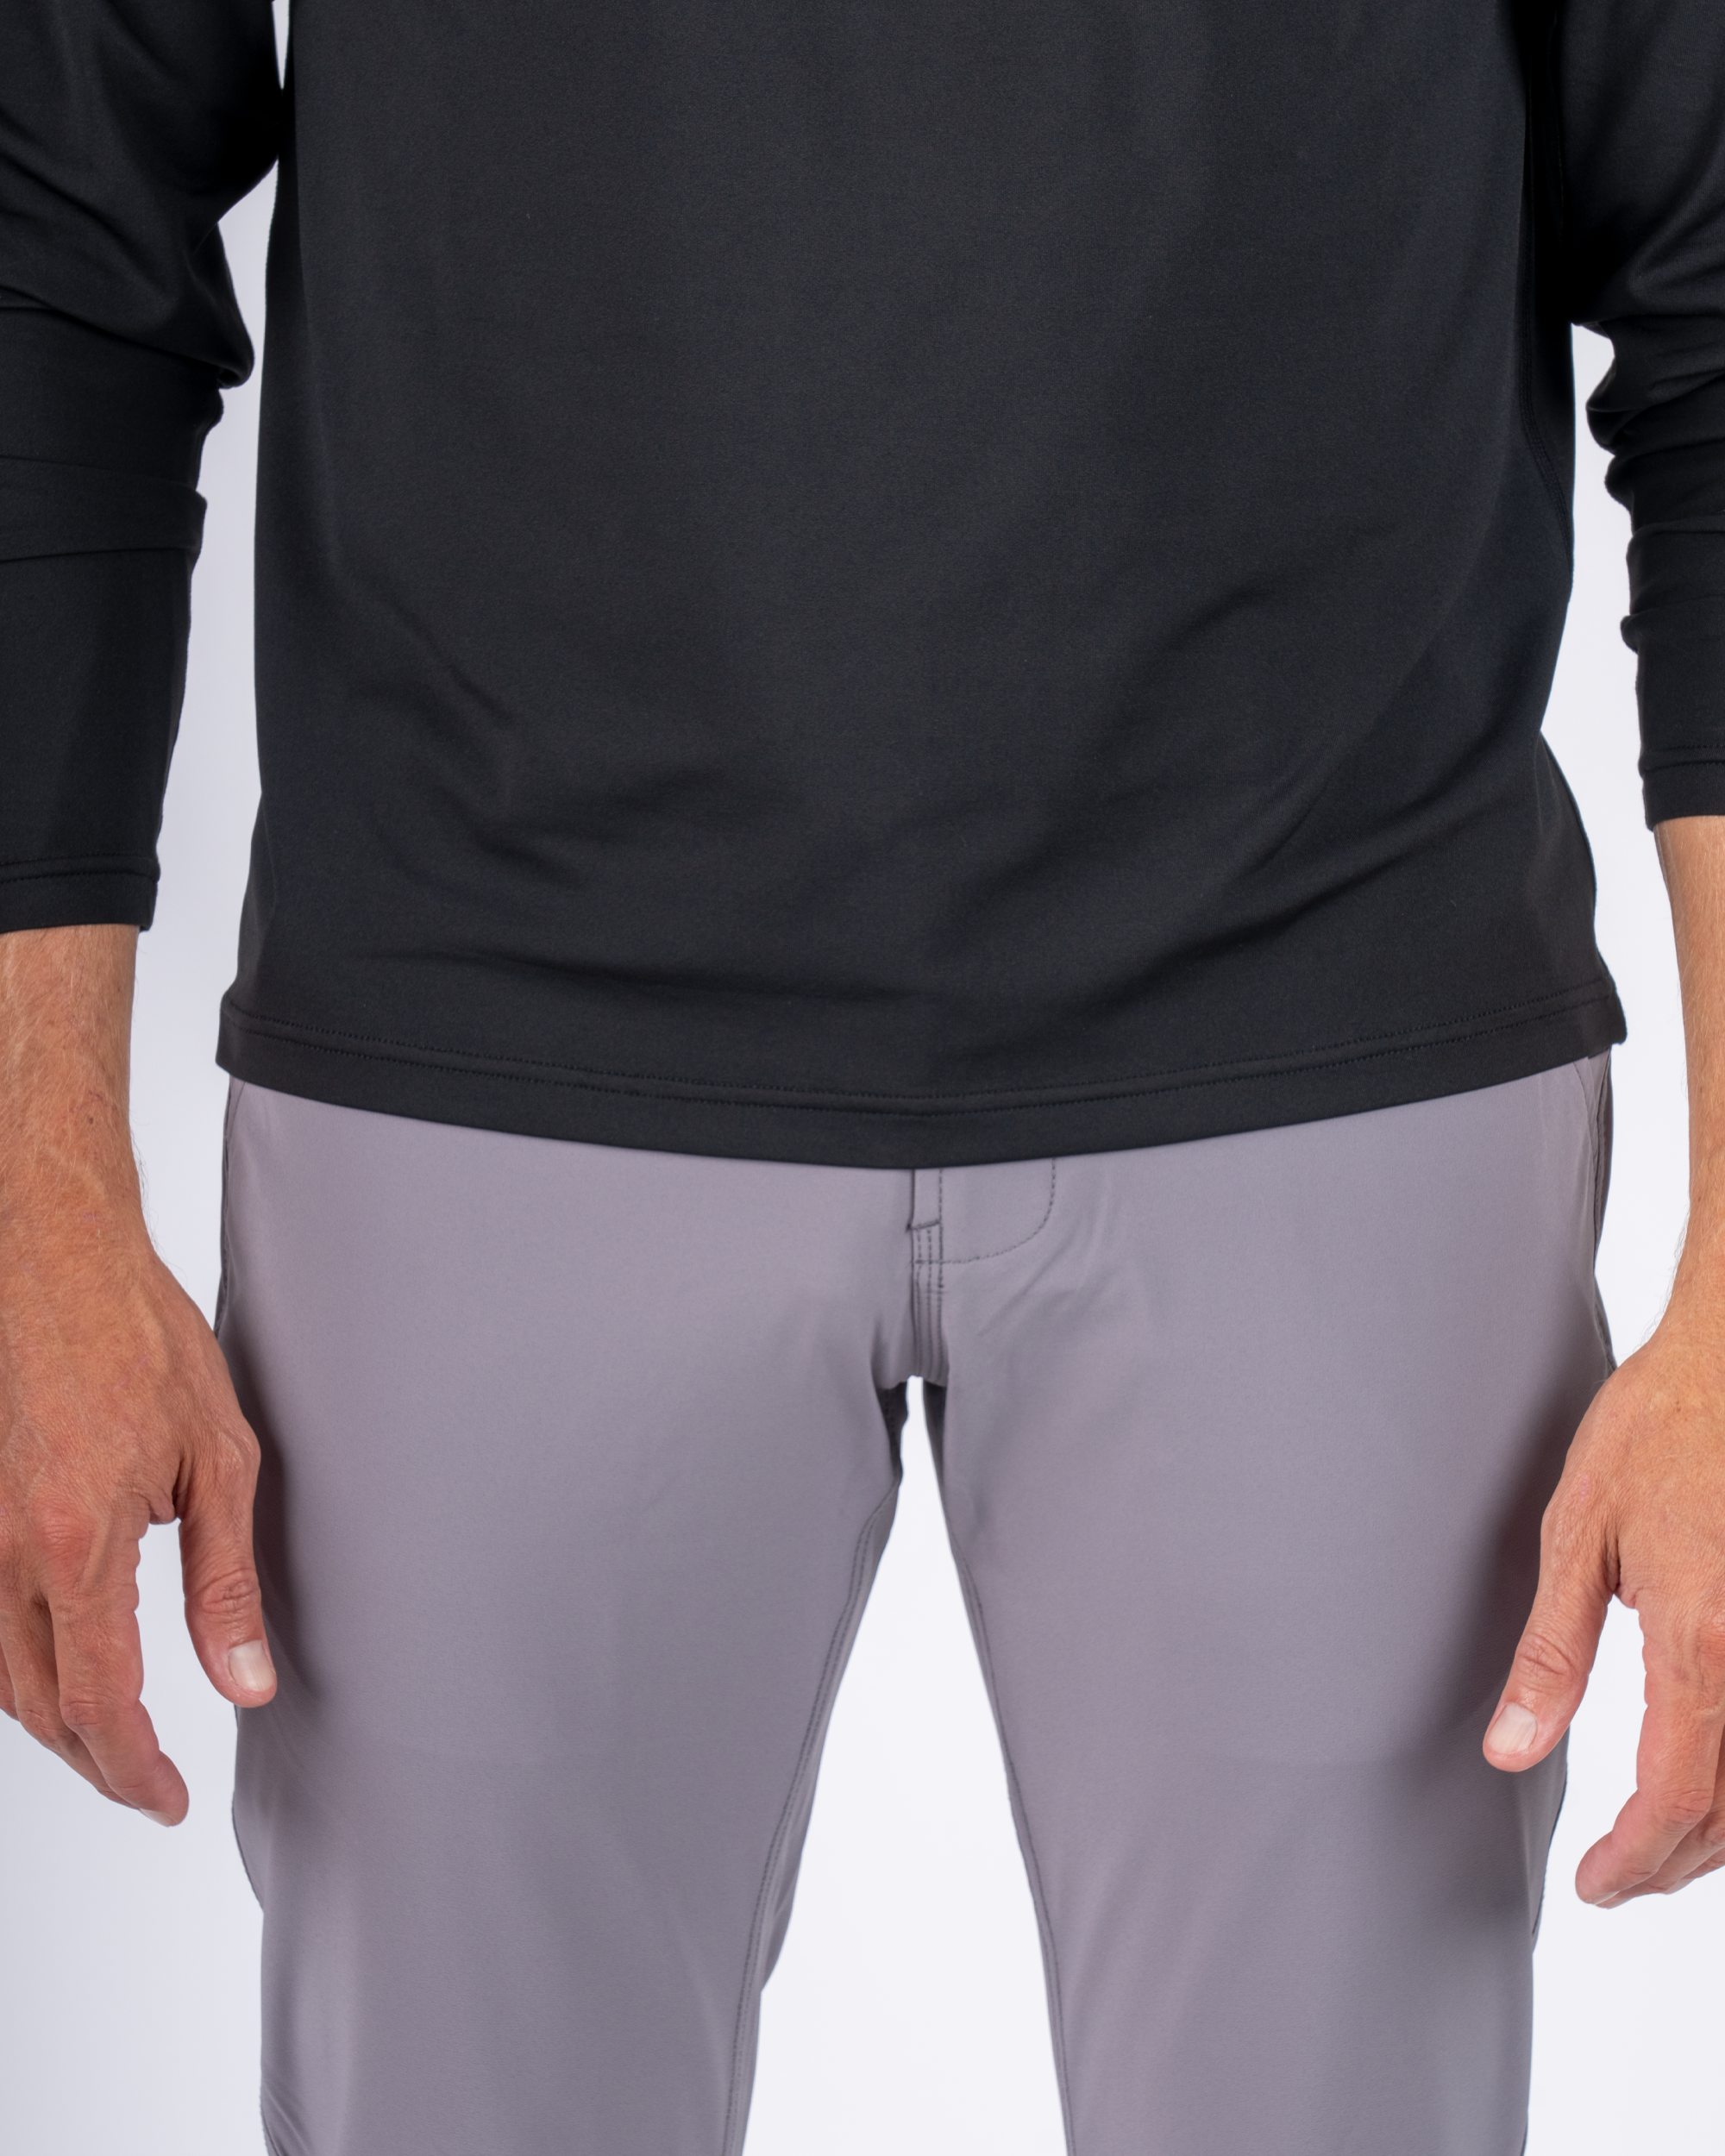 Foreign Rider Co Technical Fabric Grey Pants Front Detail